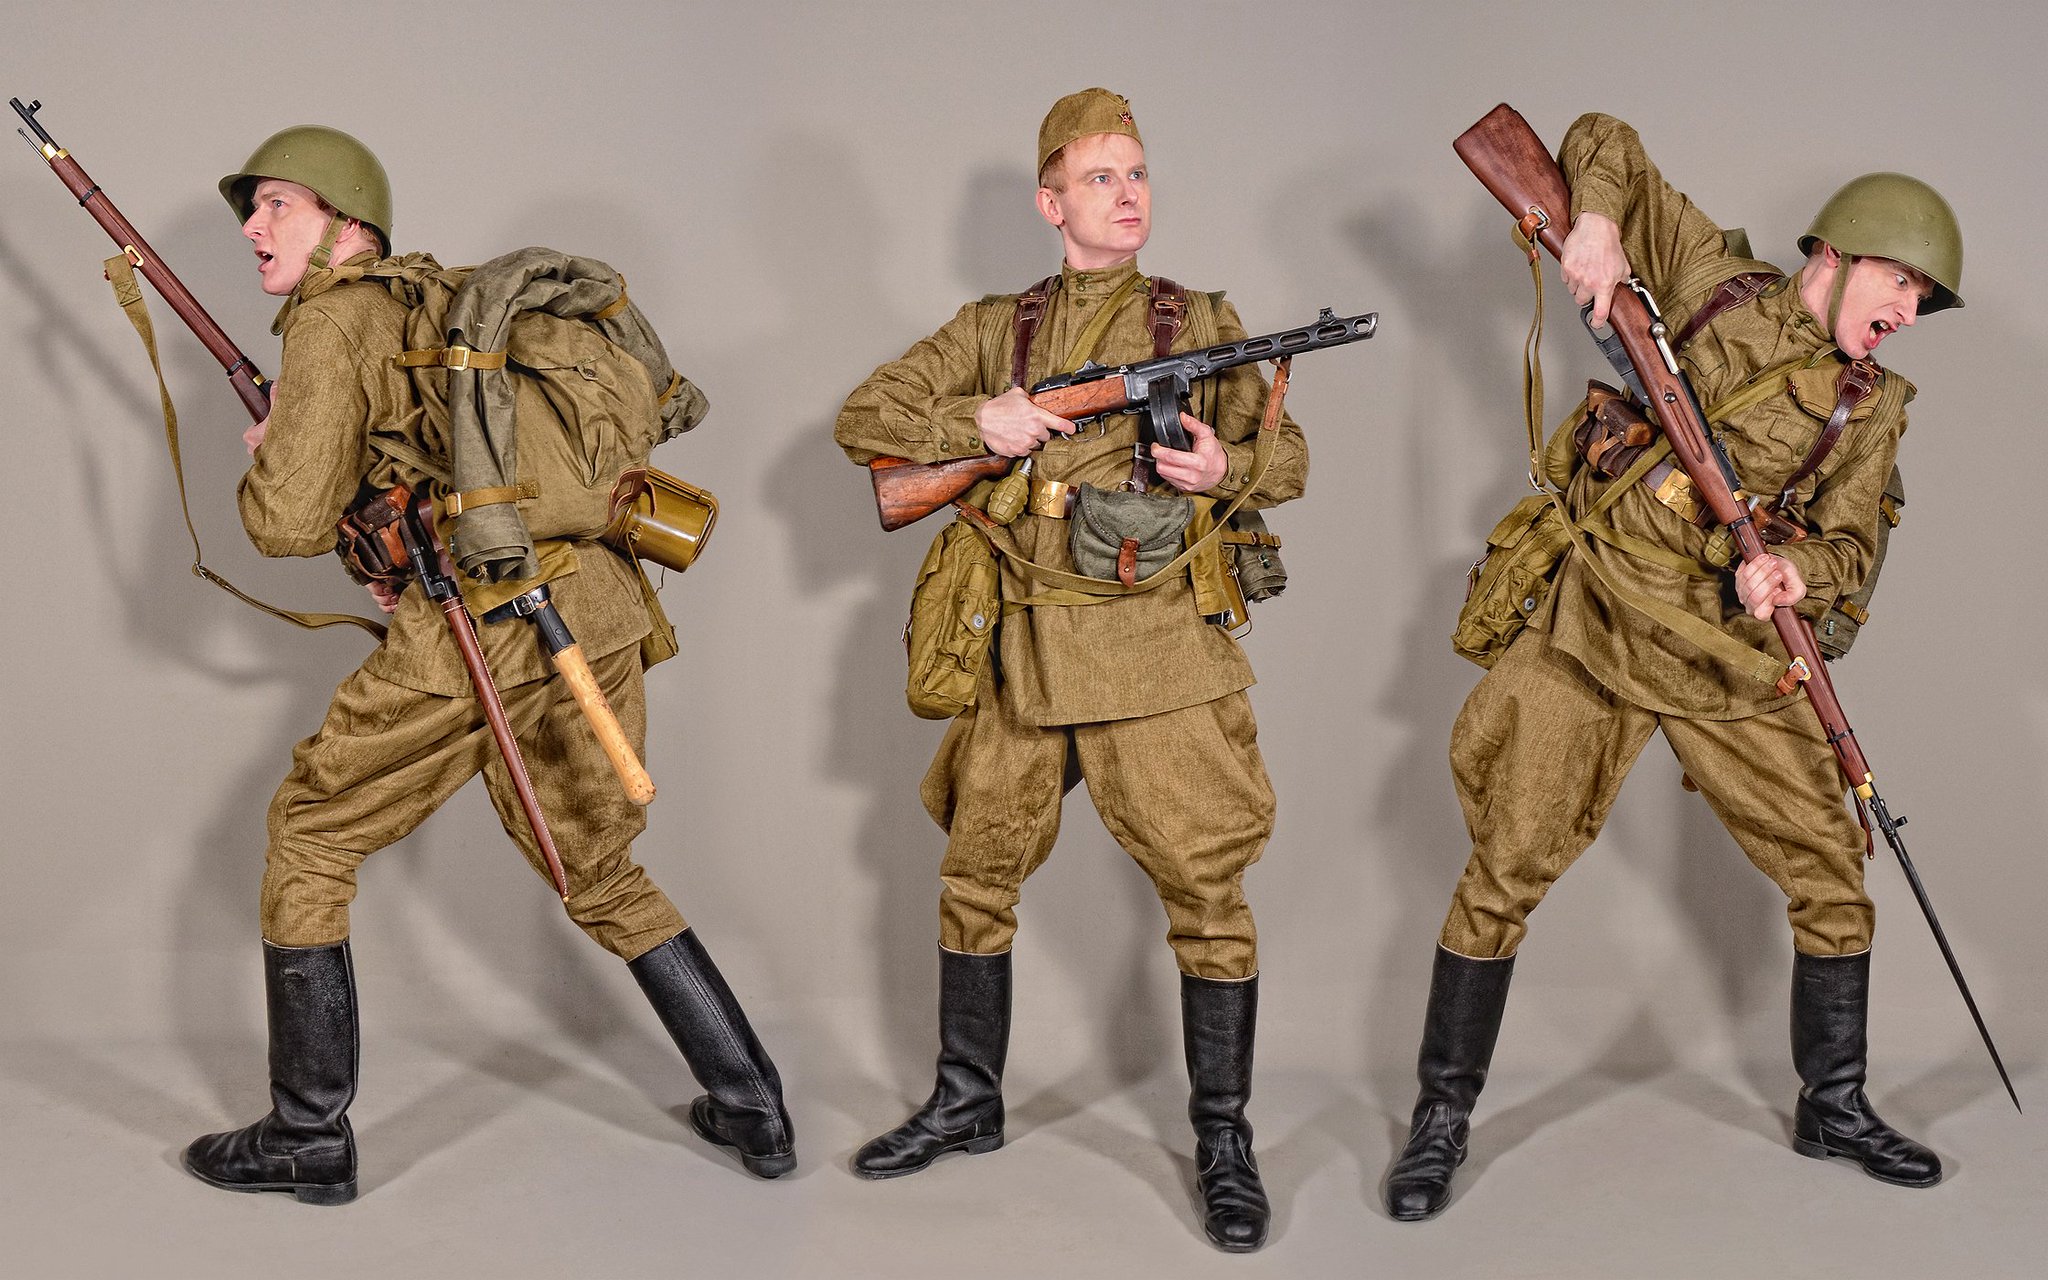 Military Uniform On Twitter Soviet Infantry Late Ww2 And Early Cold War Uniform Style